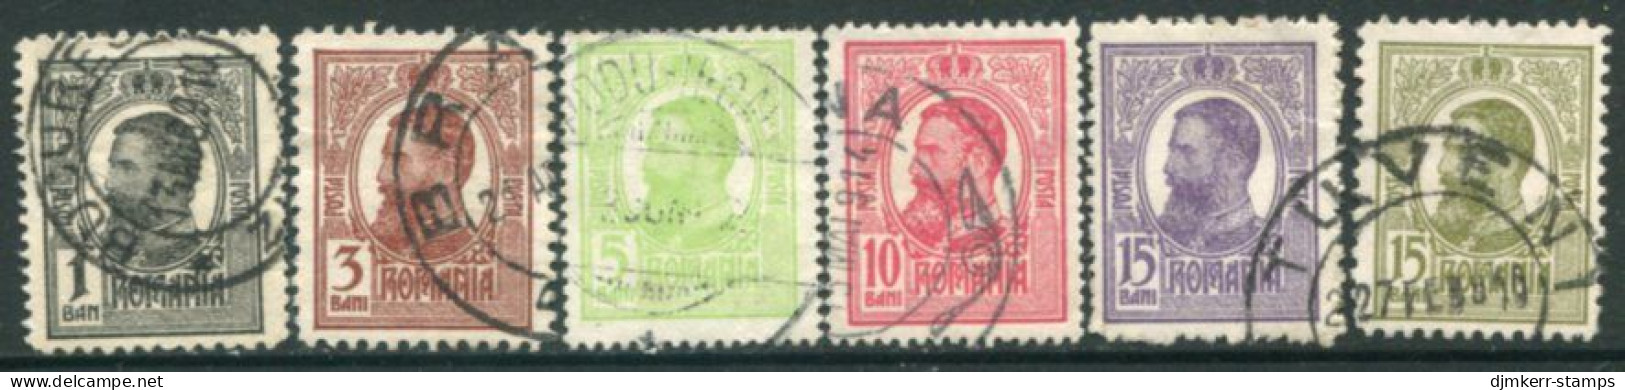 ROMANIA 1909 Definitive King Carol I .used..  Michel 220-25 - Used Stamps